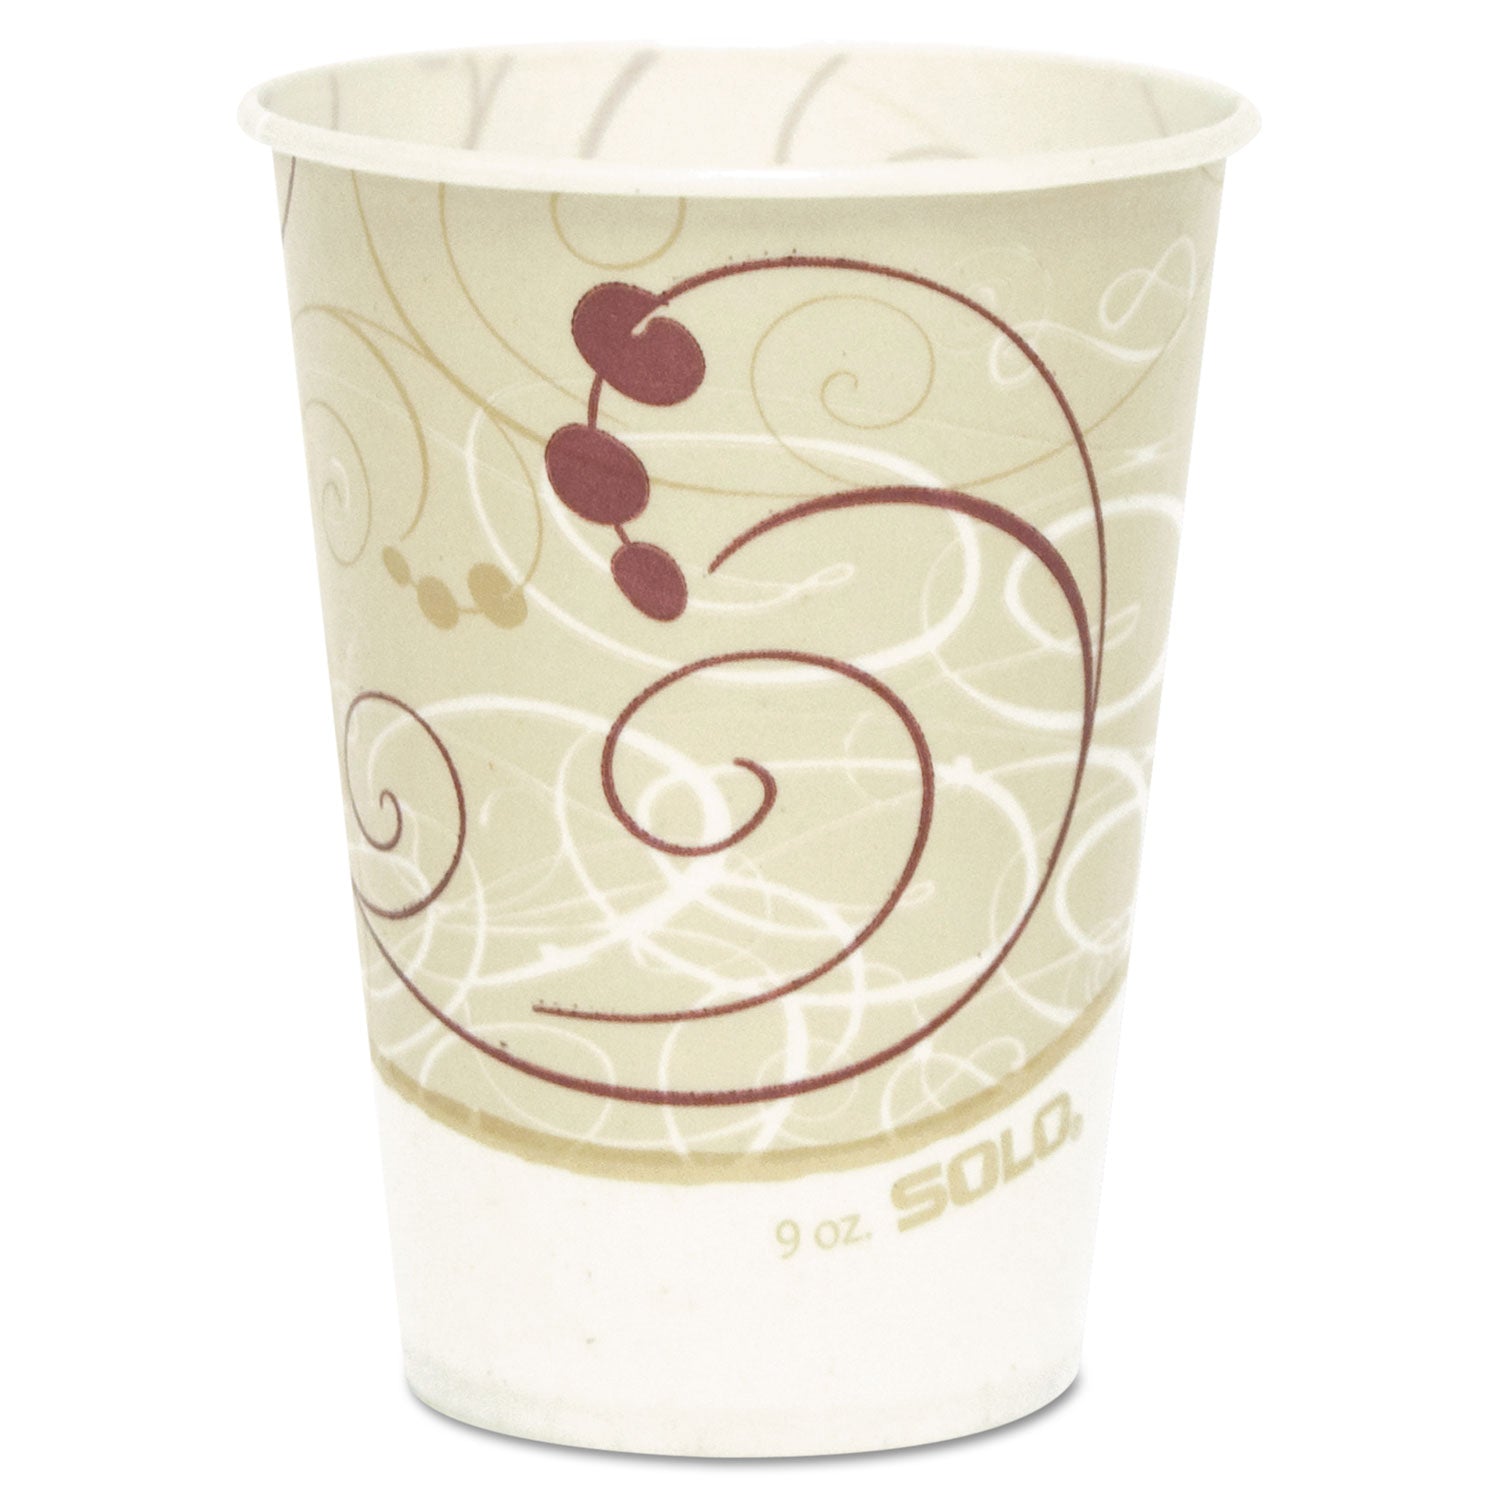 symphony-design-wax-coated-paper-cold-cups-proplanet-seal-9-oz-beige-white-100-sleeve-20-sleeves-carton_sccr9nsym - 1